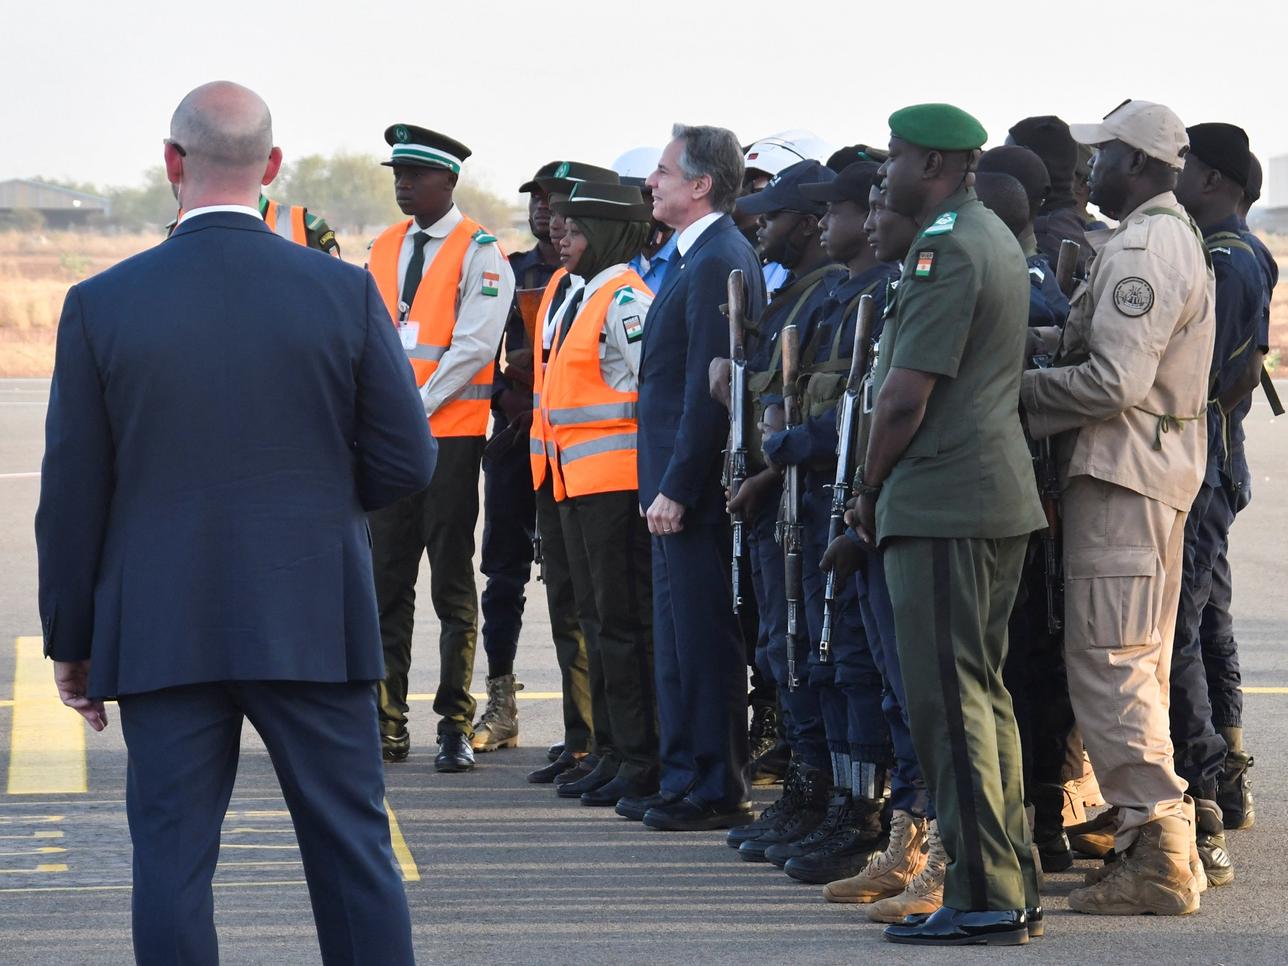 US Secretary of State Antony Blinken poses for a photograph with members of the Niger Defence and Security Forces before departing Niger on Friday.